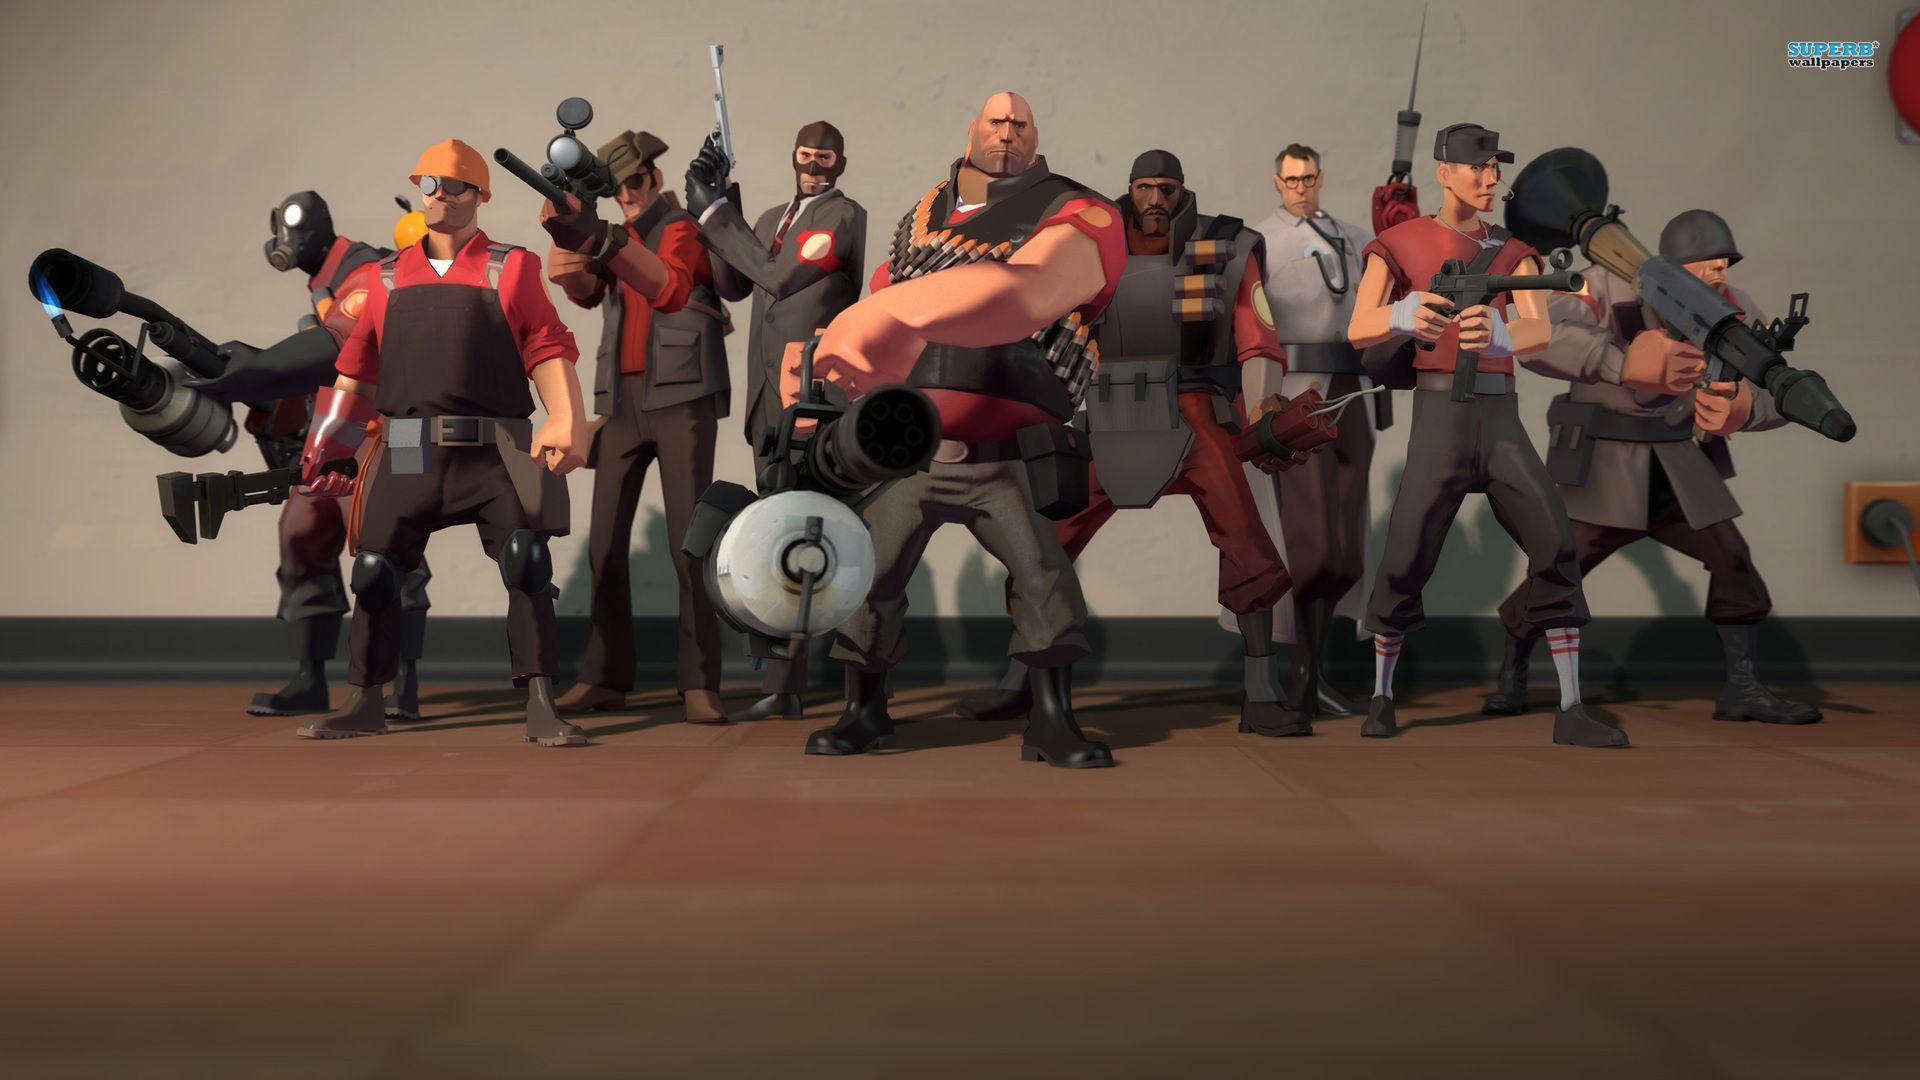 Team Fortress 2 Wallpaper For Ipad